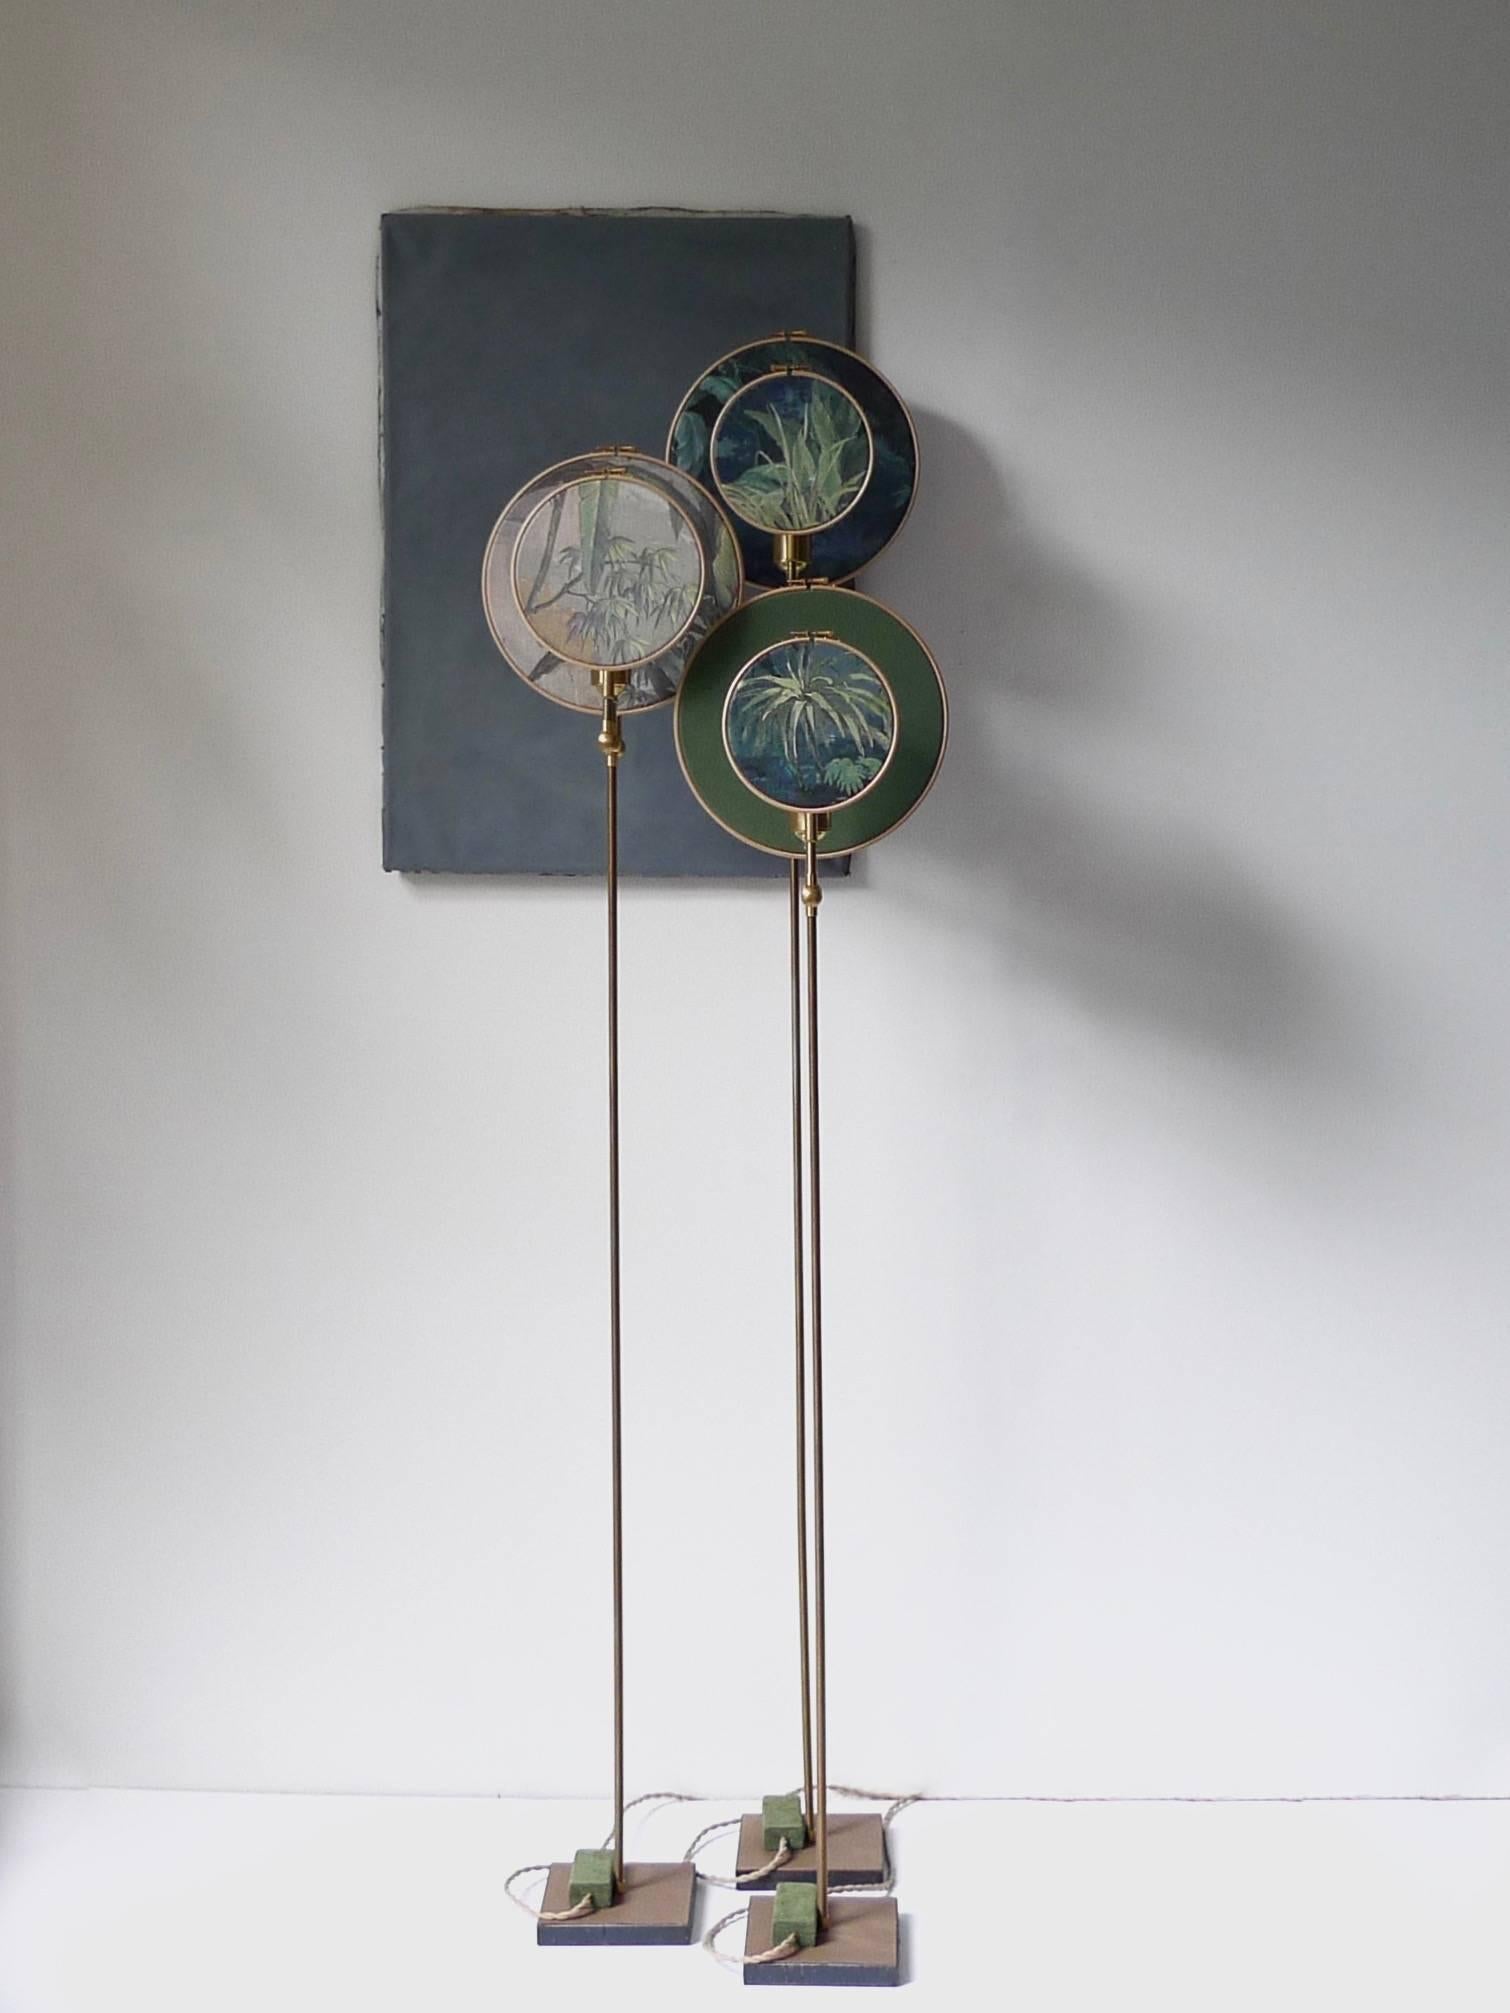 Light object, floor lamp, circle blue grey.
Handmade in brass, leather, wood and hand printed and painted linen.
A dimmer is inlaid with leather.
Dimensions: H 160 x W 27 x D 16 cm.
The design artwork is meticulously handcrafted in a limited